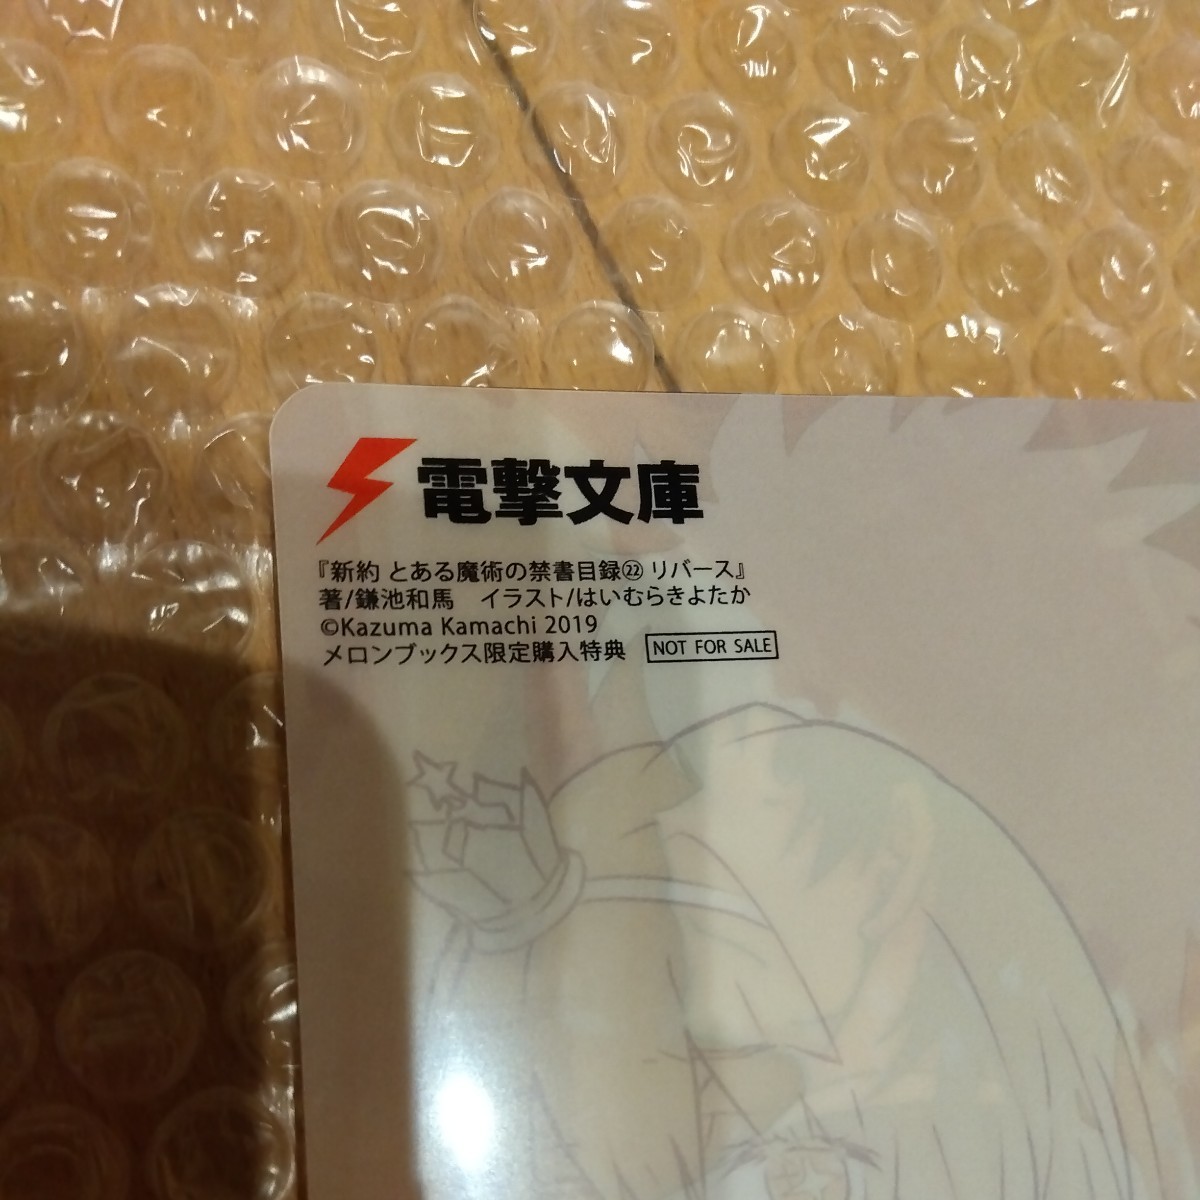  Dengeki Bunko [ new approximately certain ... prohibited literature list Rebirth ] melon books limitation buy privilege yes . Lucky ... not for sale clear file 